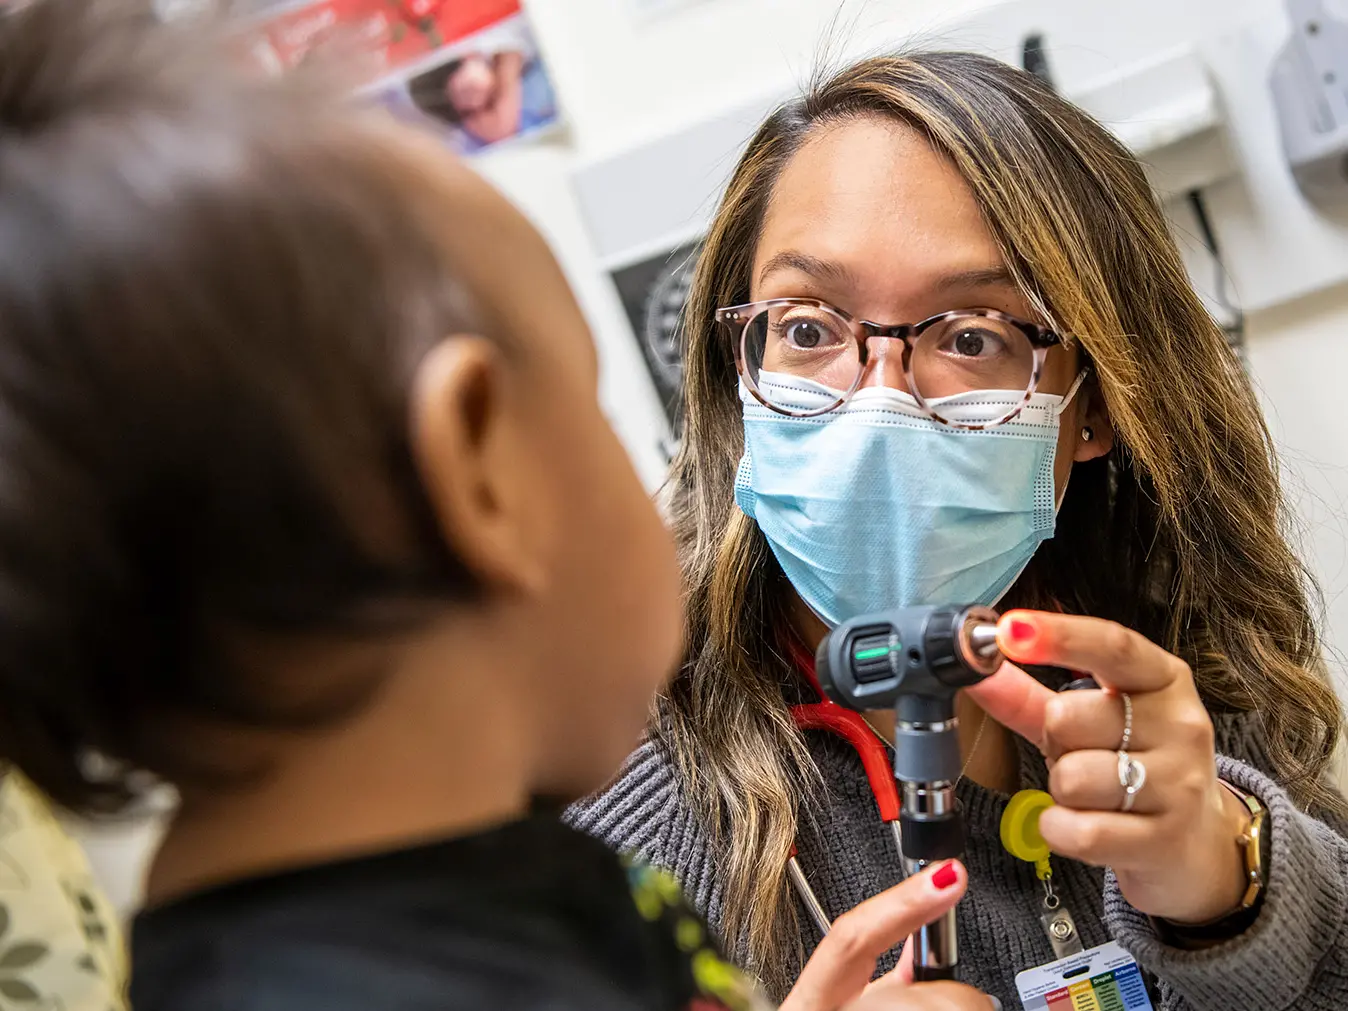 A young doctor of Guatemalan descent wears round tortoiseshell glasses, a surgical mask and a wide-eyed expression as she connects with a toddler. She’s showing the little girl the tool she’ll use to look in her ears.